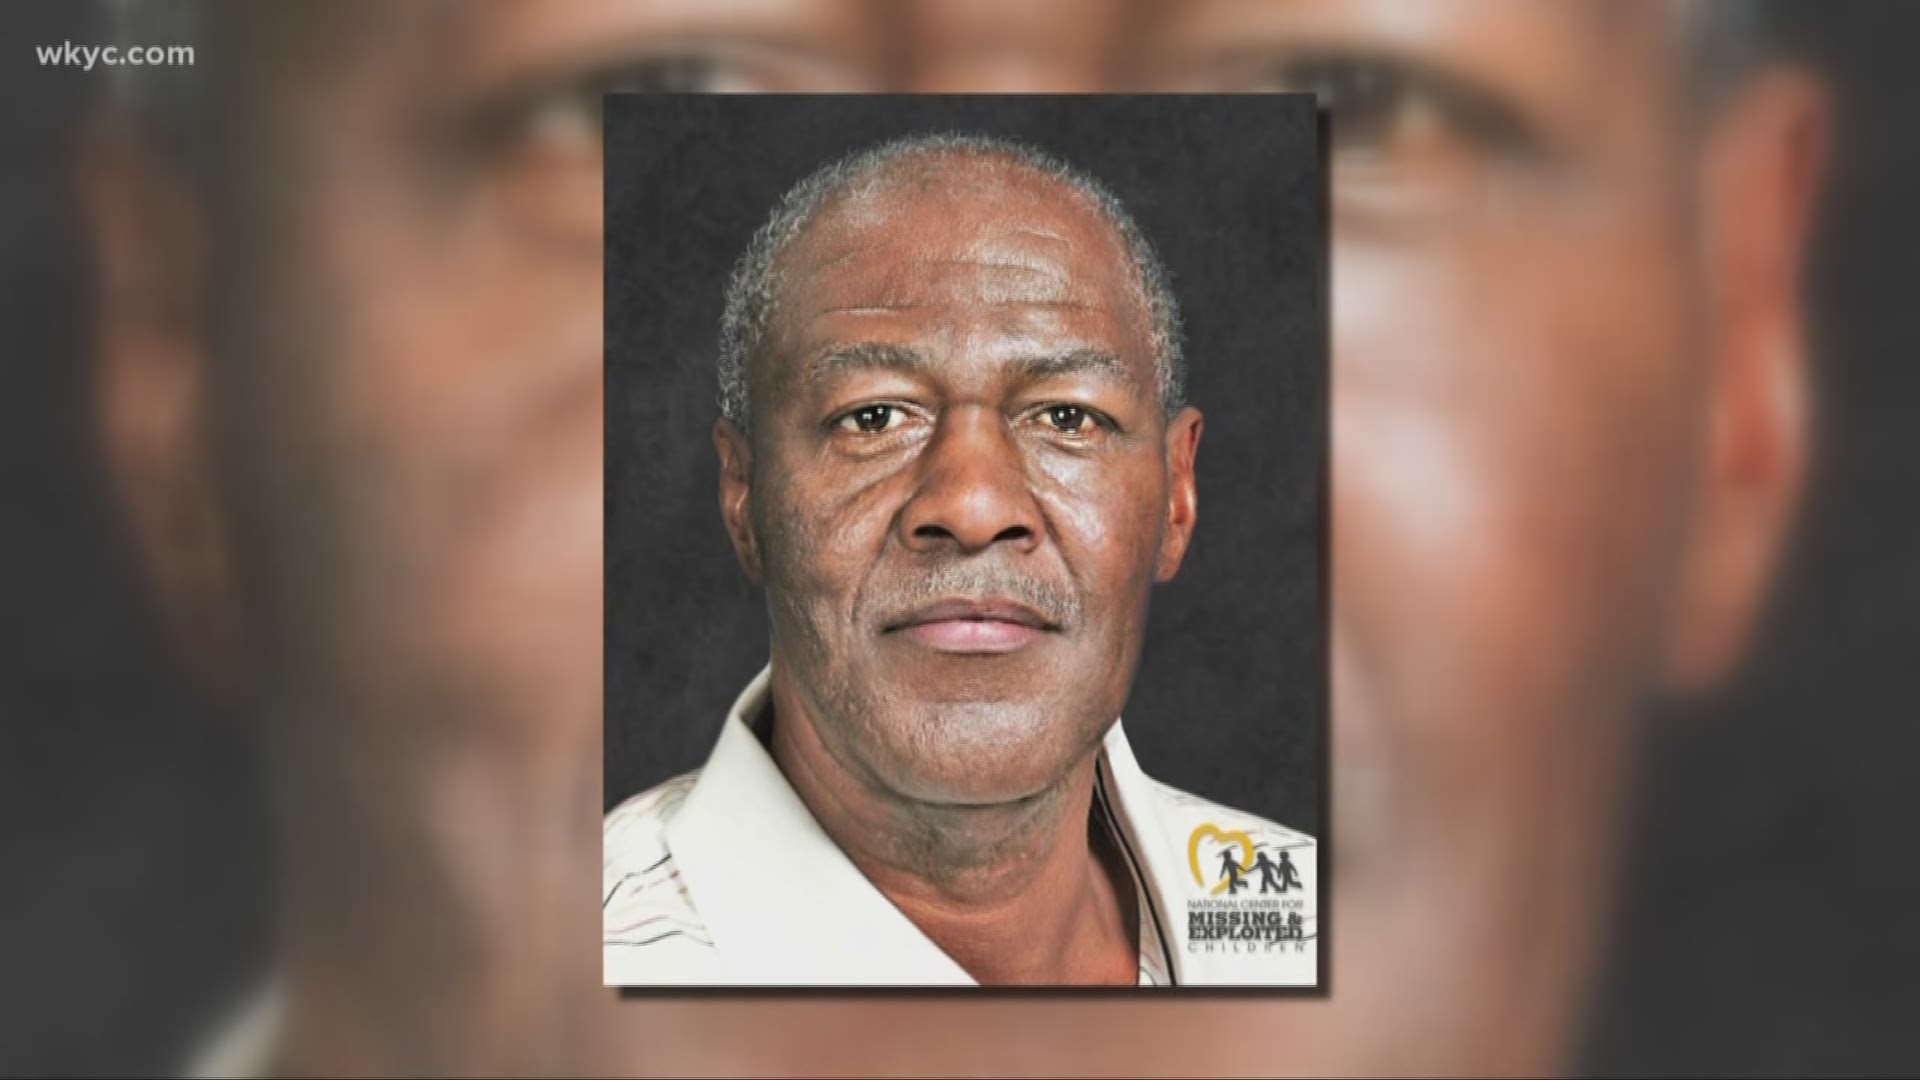 Lester Eubanks has evaded police custody for more than 45 years. On Tuesday, officials released a new age progression photo showing what the now 75-year-old man would look like.